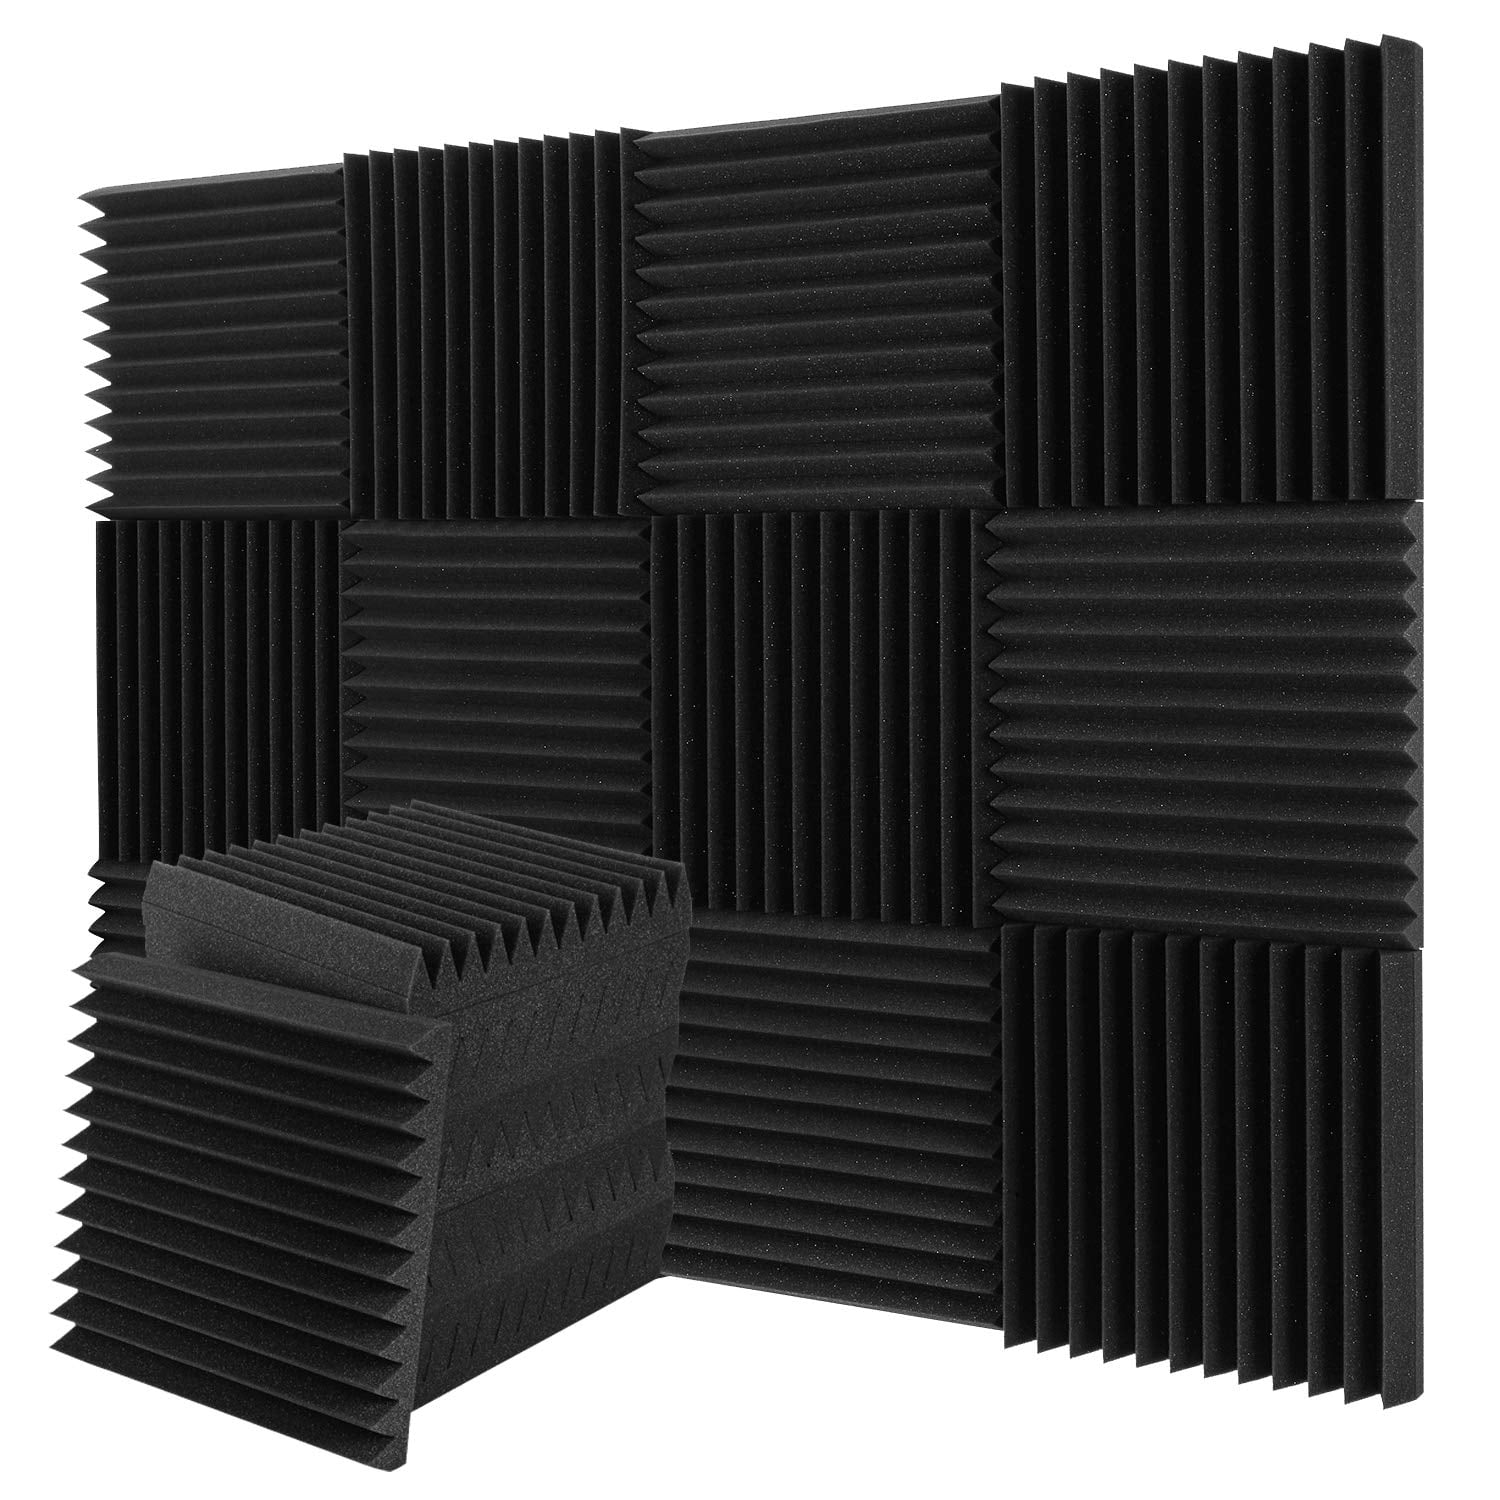 12 Pack Acoustic Foam Panels Sound Absorbing Foam for Music Studio Bedroom Home Decreasing Noise Self-adhesive Sound Proof Foam Panels 2 x 12 x 12 Soundproof Insulation for Wall 